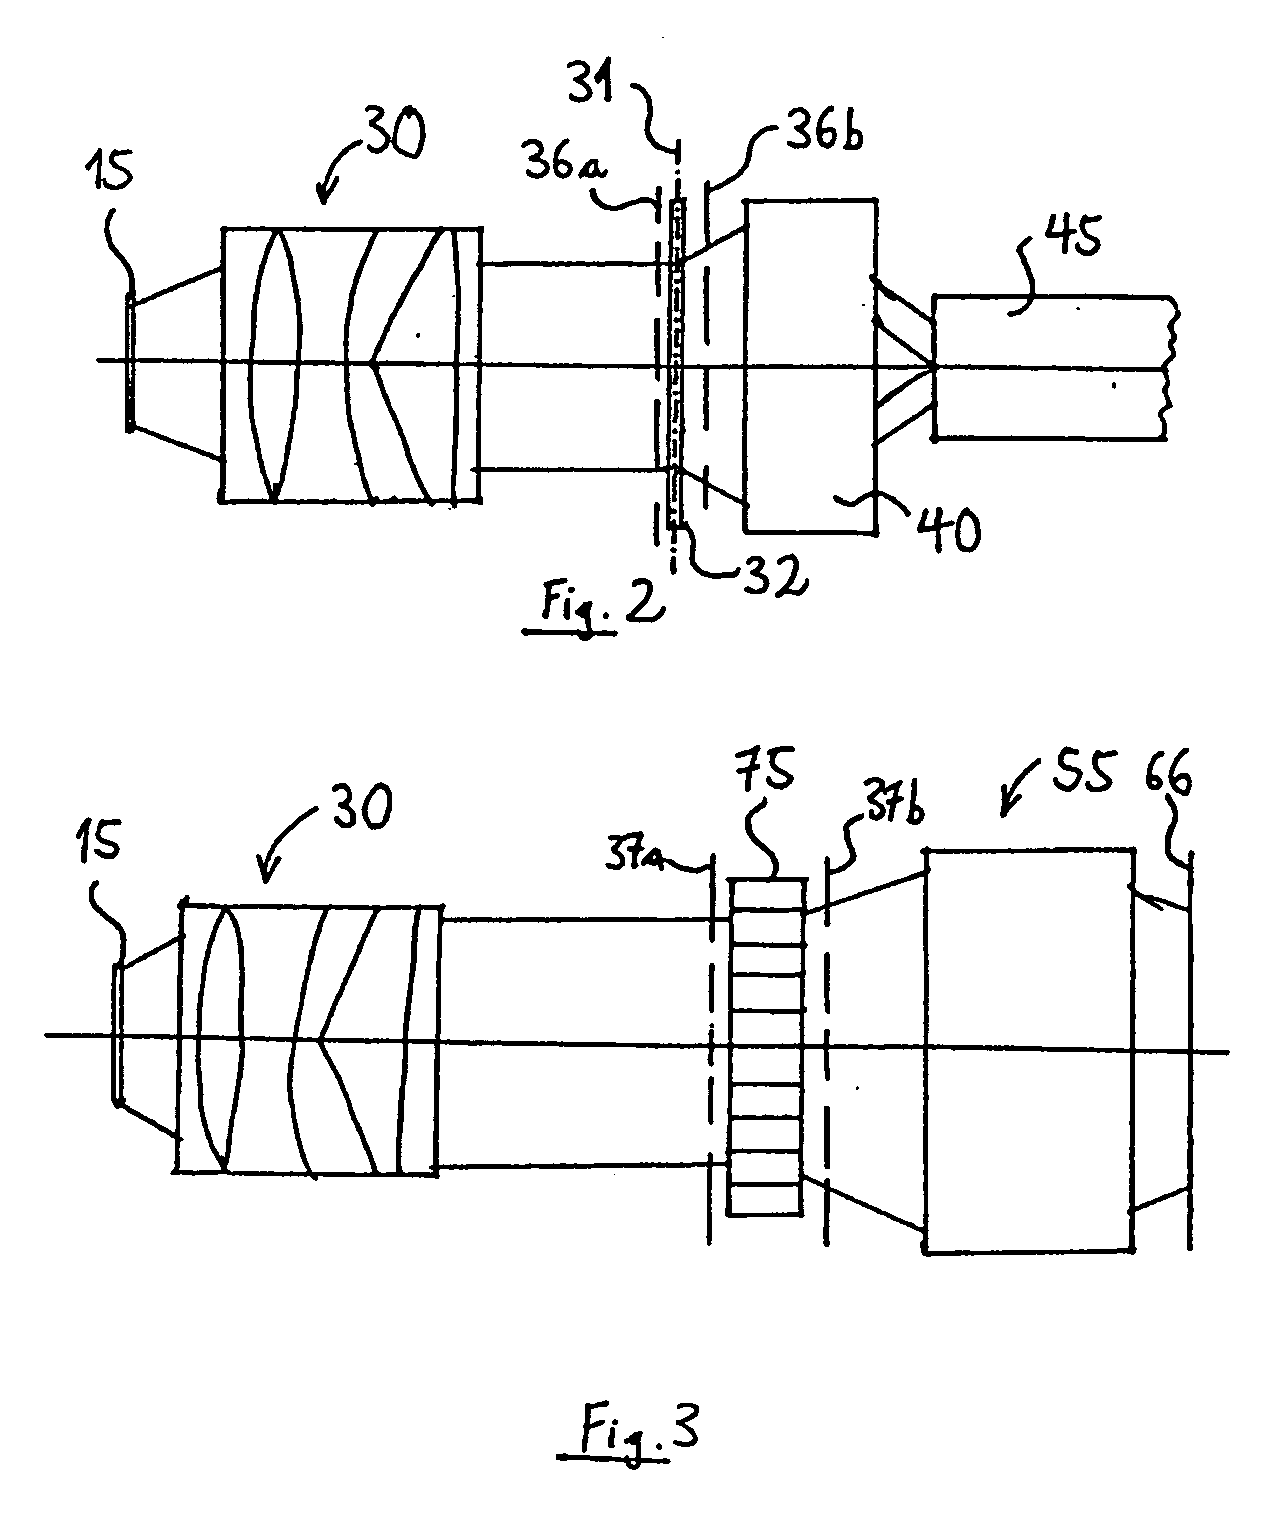 Illumination system for microlithography